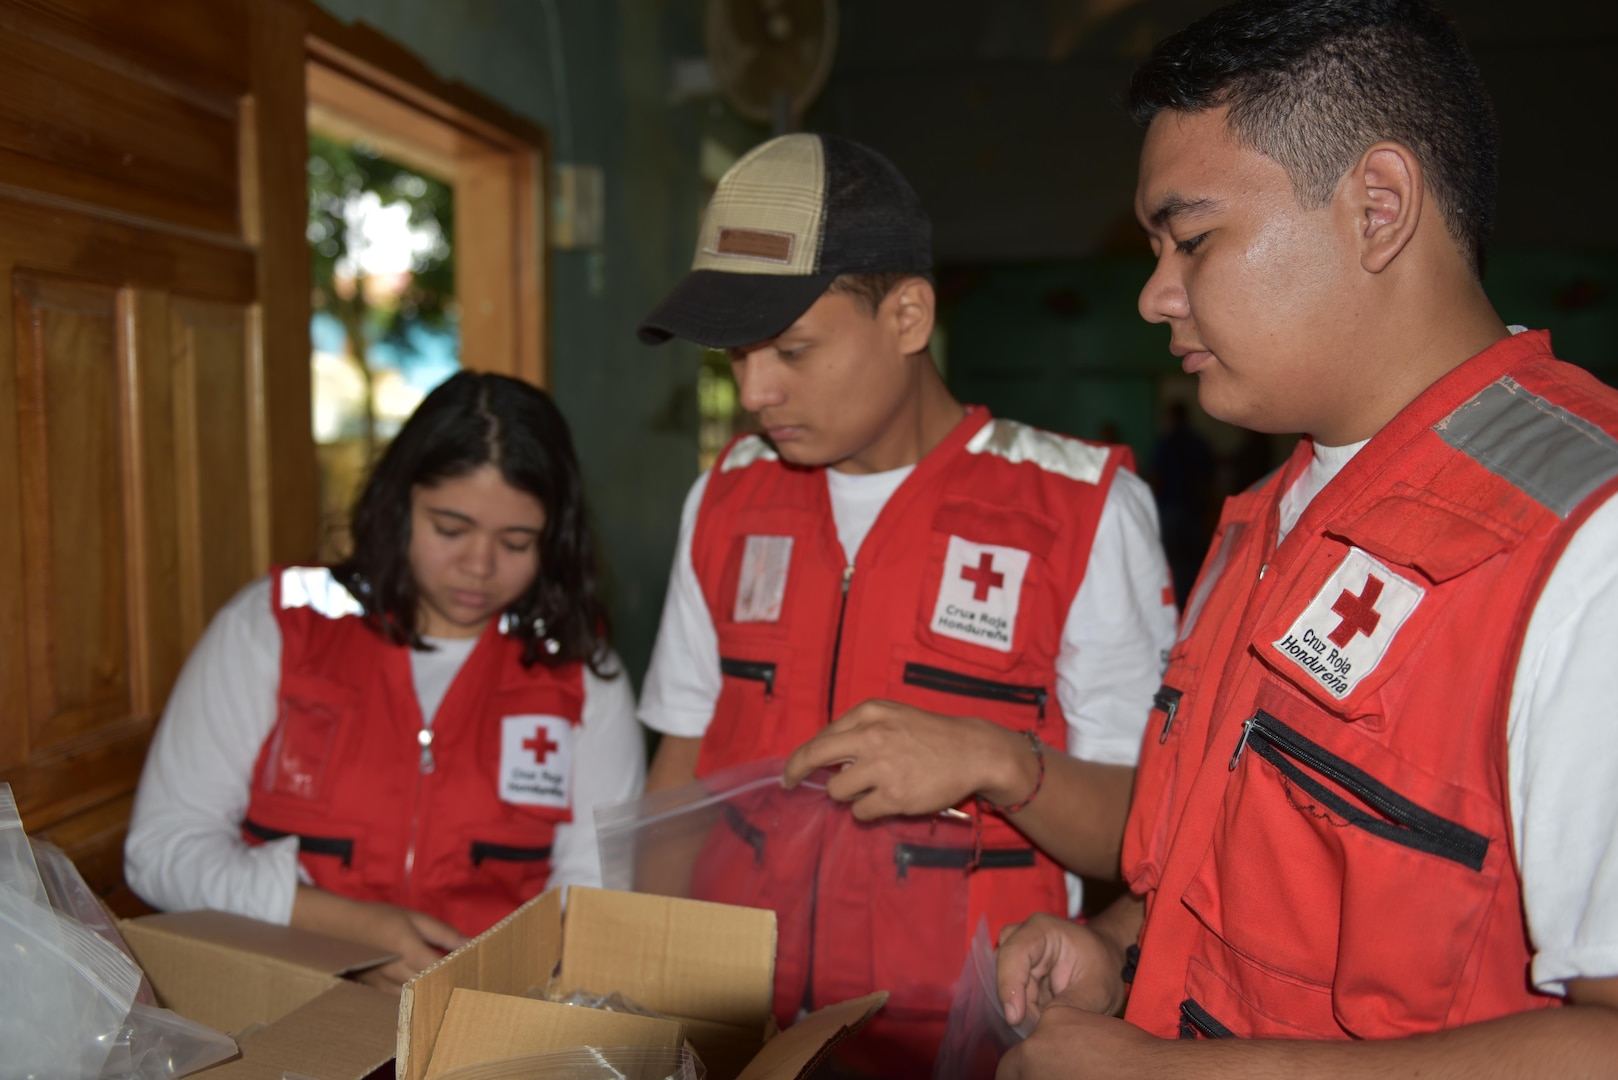 Red Cross volunteers sort vitamins and deworming medication into care bags provided by the preventive medicine team during a Medical Readiness Training Exercise in Corinto, Cortes, Feb. 16, 2017. Red Cross volunteers also facilitated communication between patients and U.S. medical personnel. (U.S. Army photo by Maria Pinel)